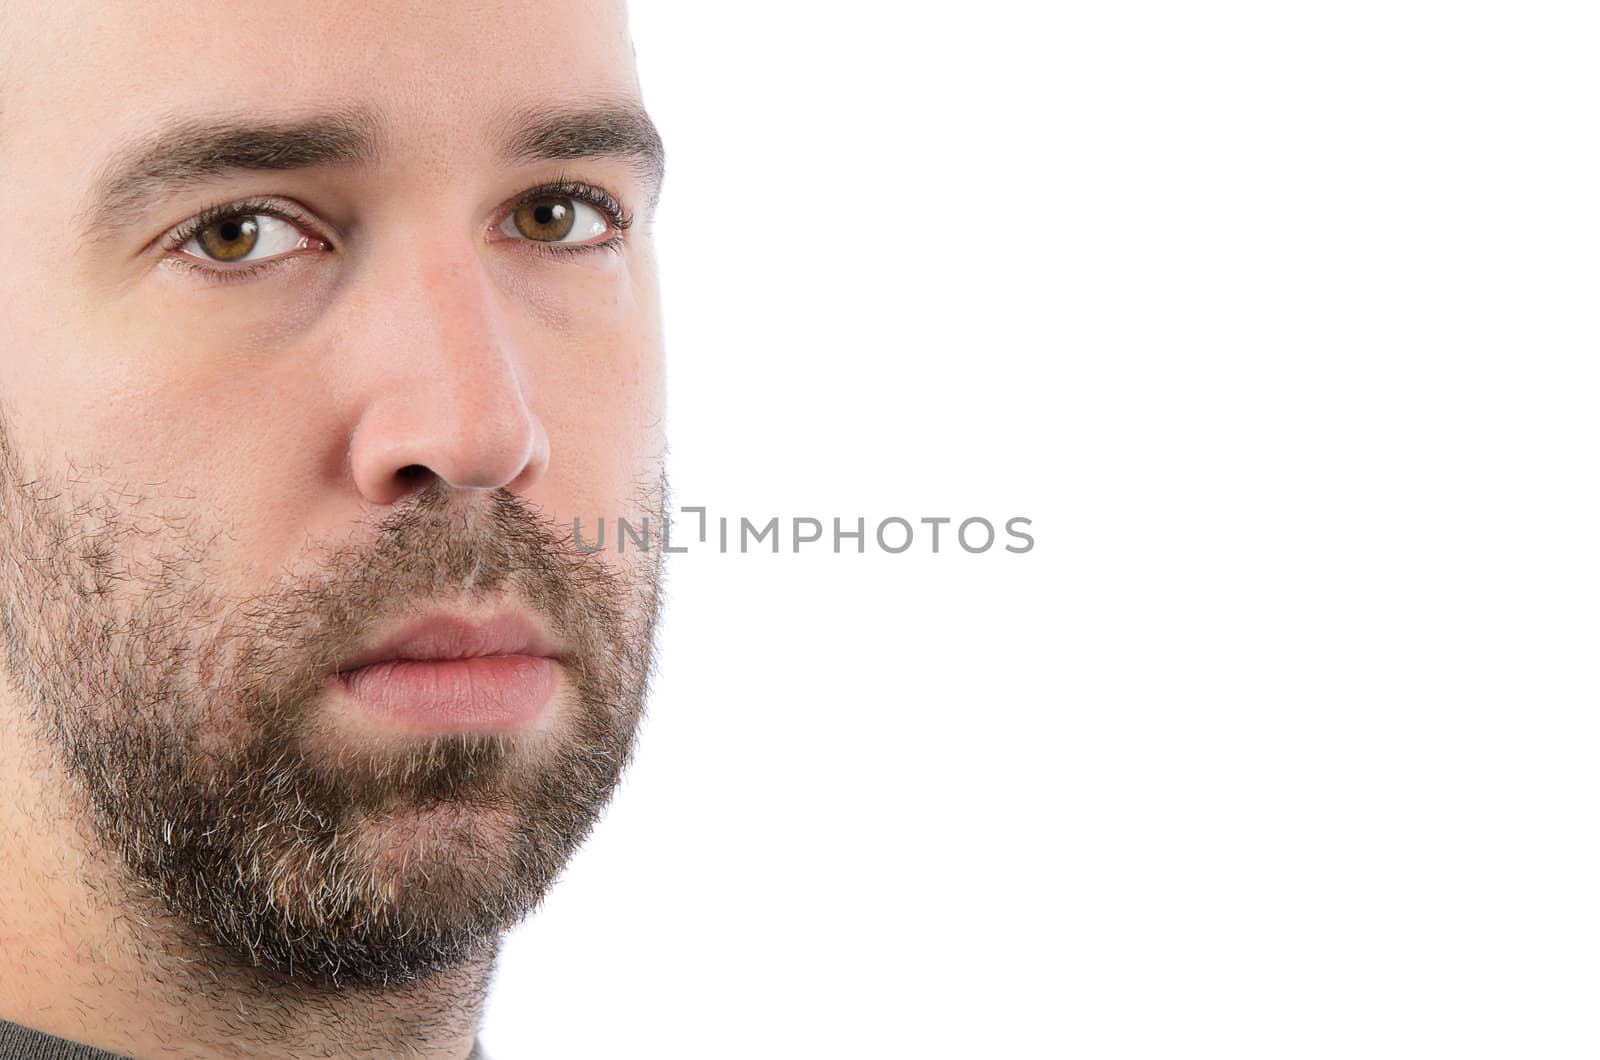 A bearded man looking at the camera, with copyspace on the right of the image.